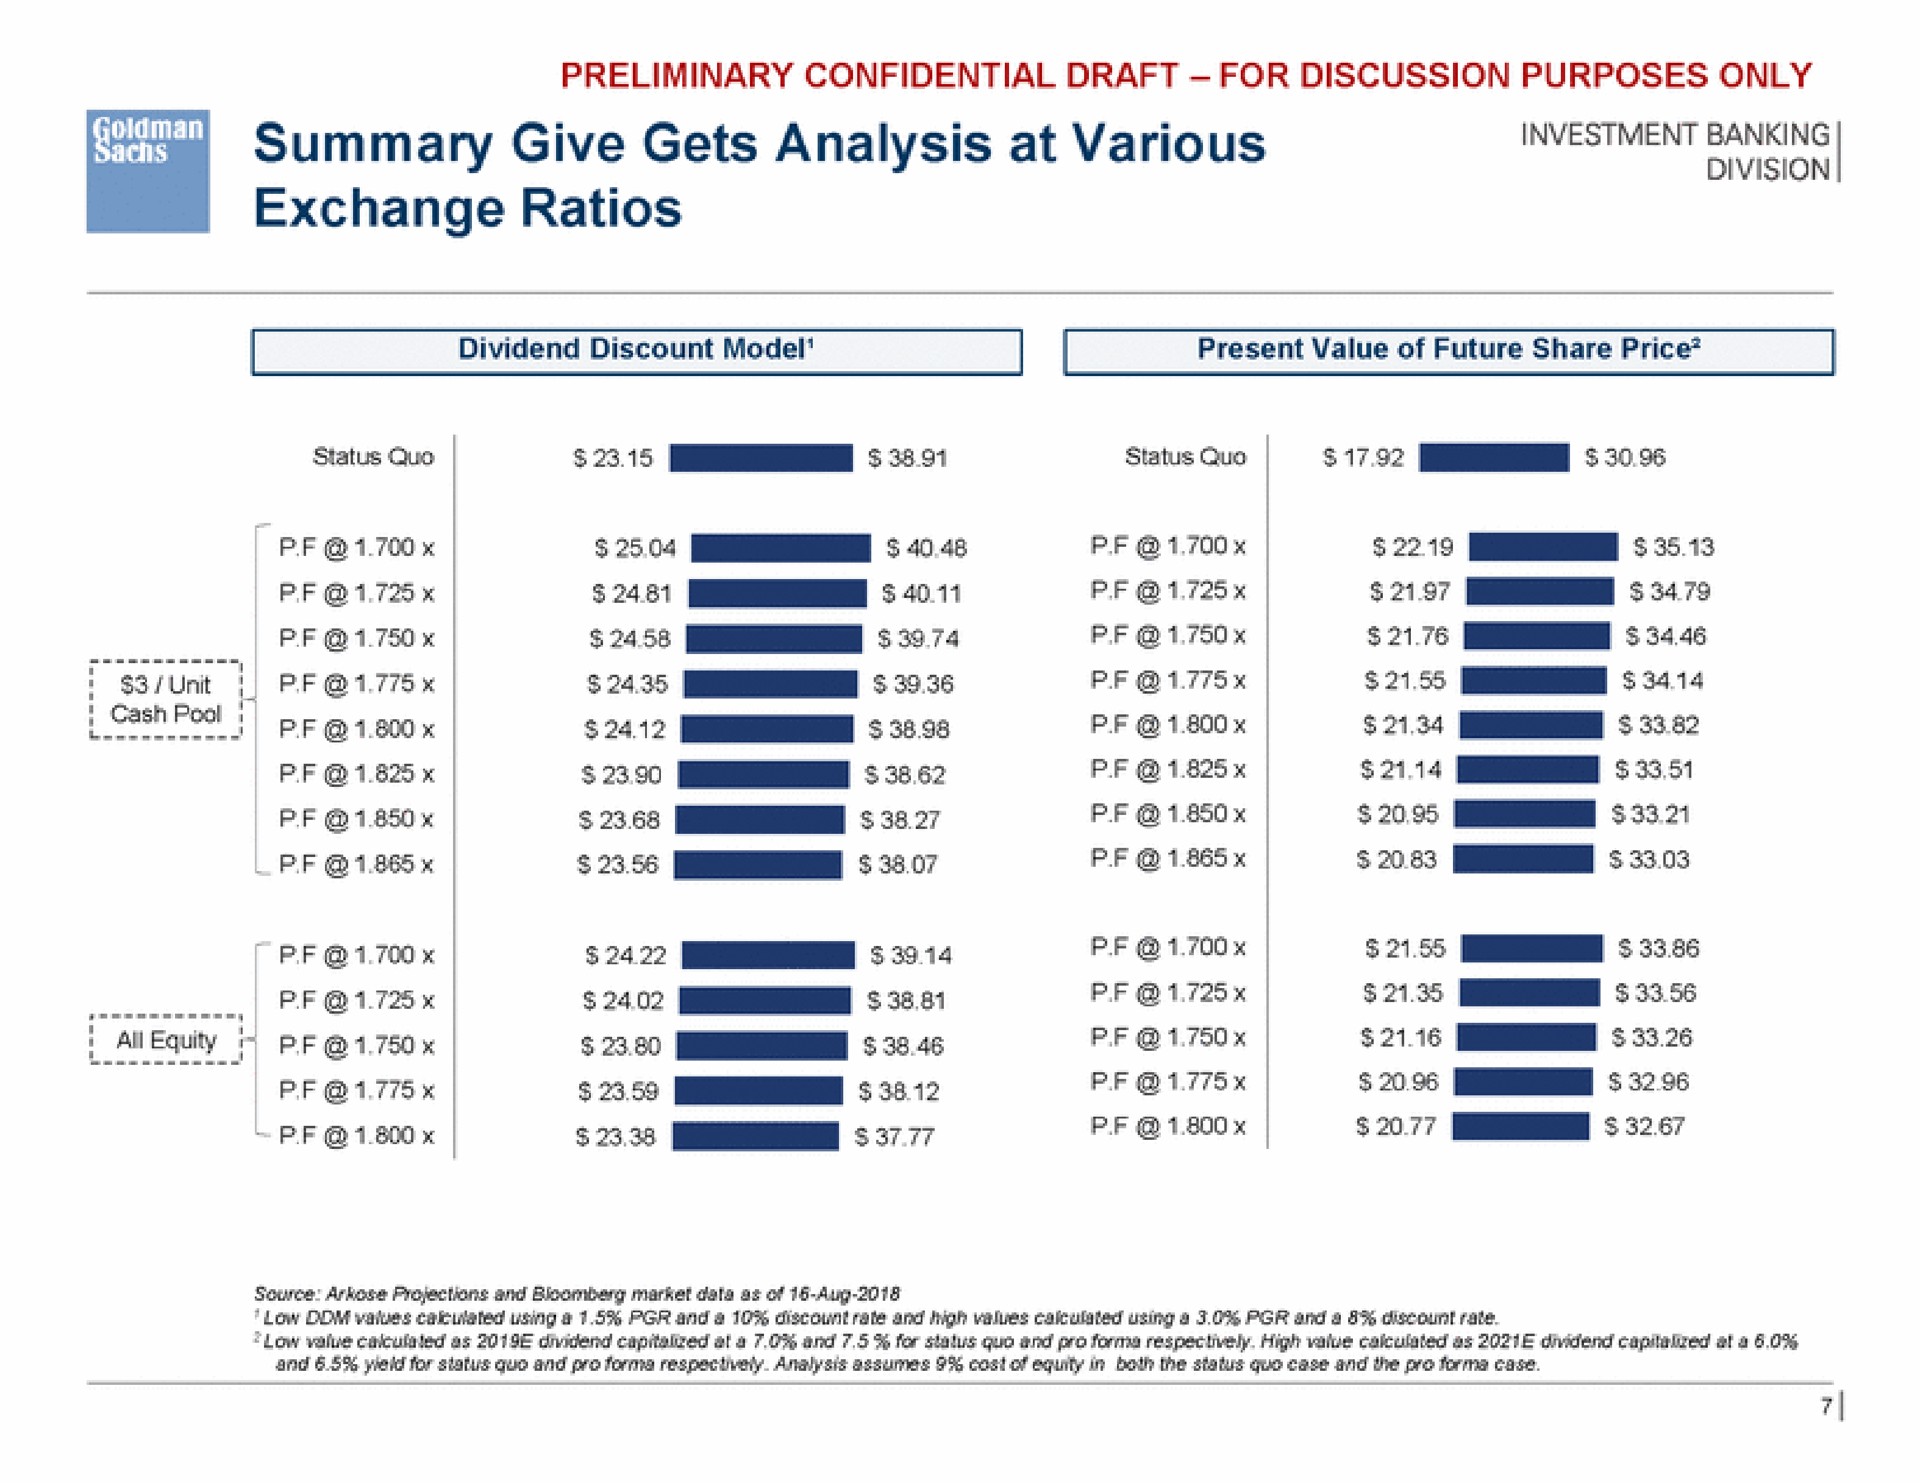 summary give gets analysis at various exchange ratios | Goldman Sachs